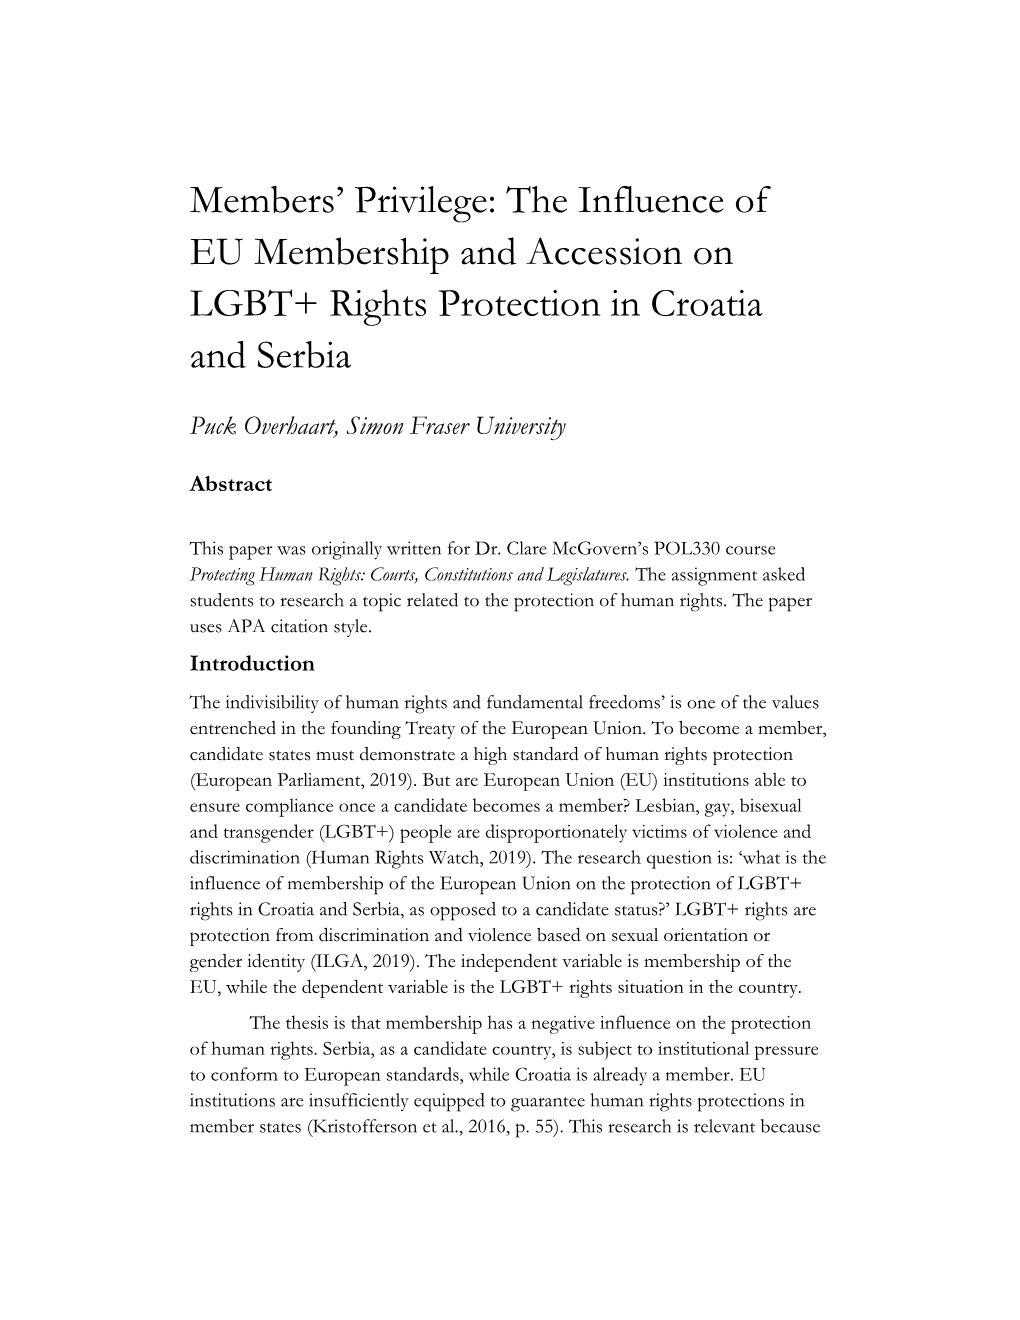 The Influence of EU Membership and Accession on LGBT+ Rights Protection in Croatia and Serbia